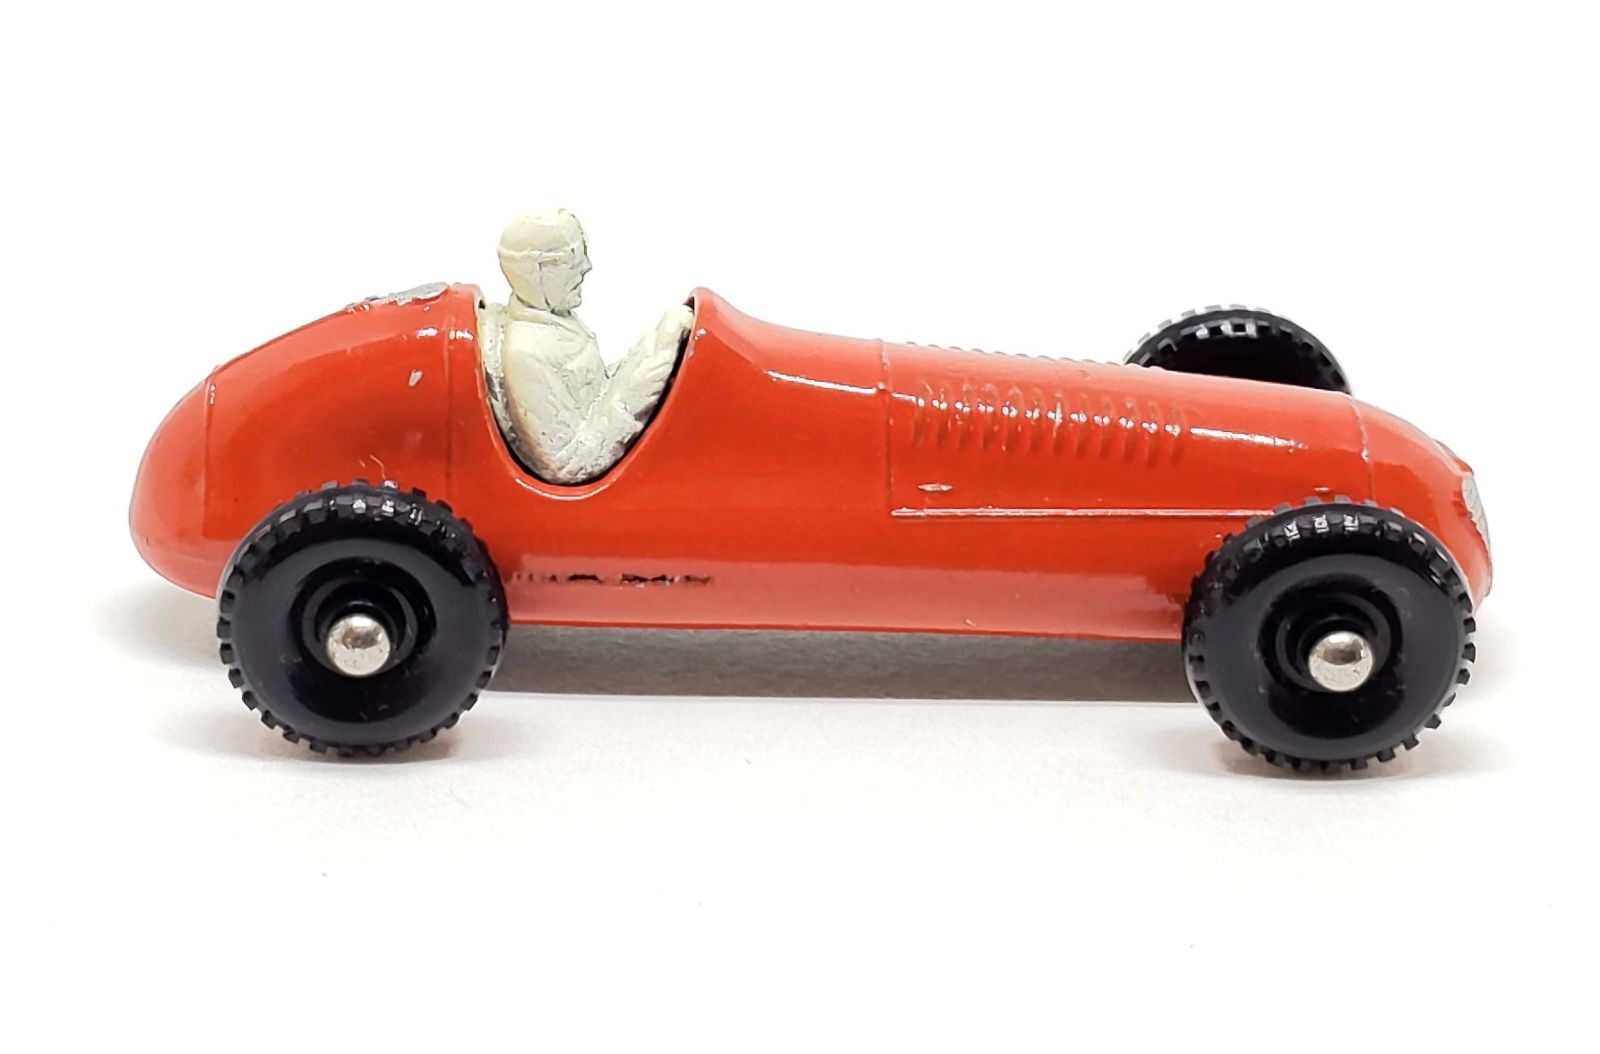 Illustration for article titled [REVIEW] Lesney Matchbox Maserati 4CLT